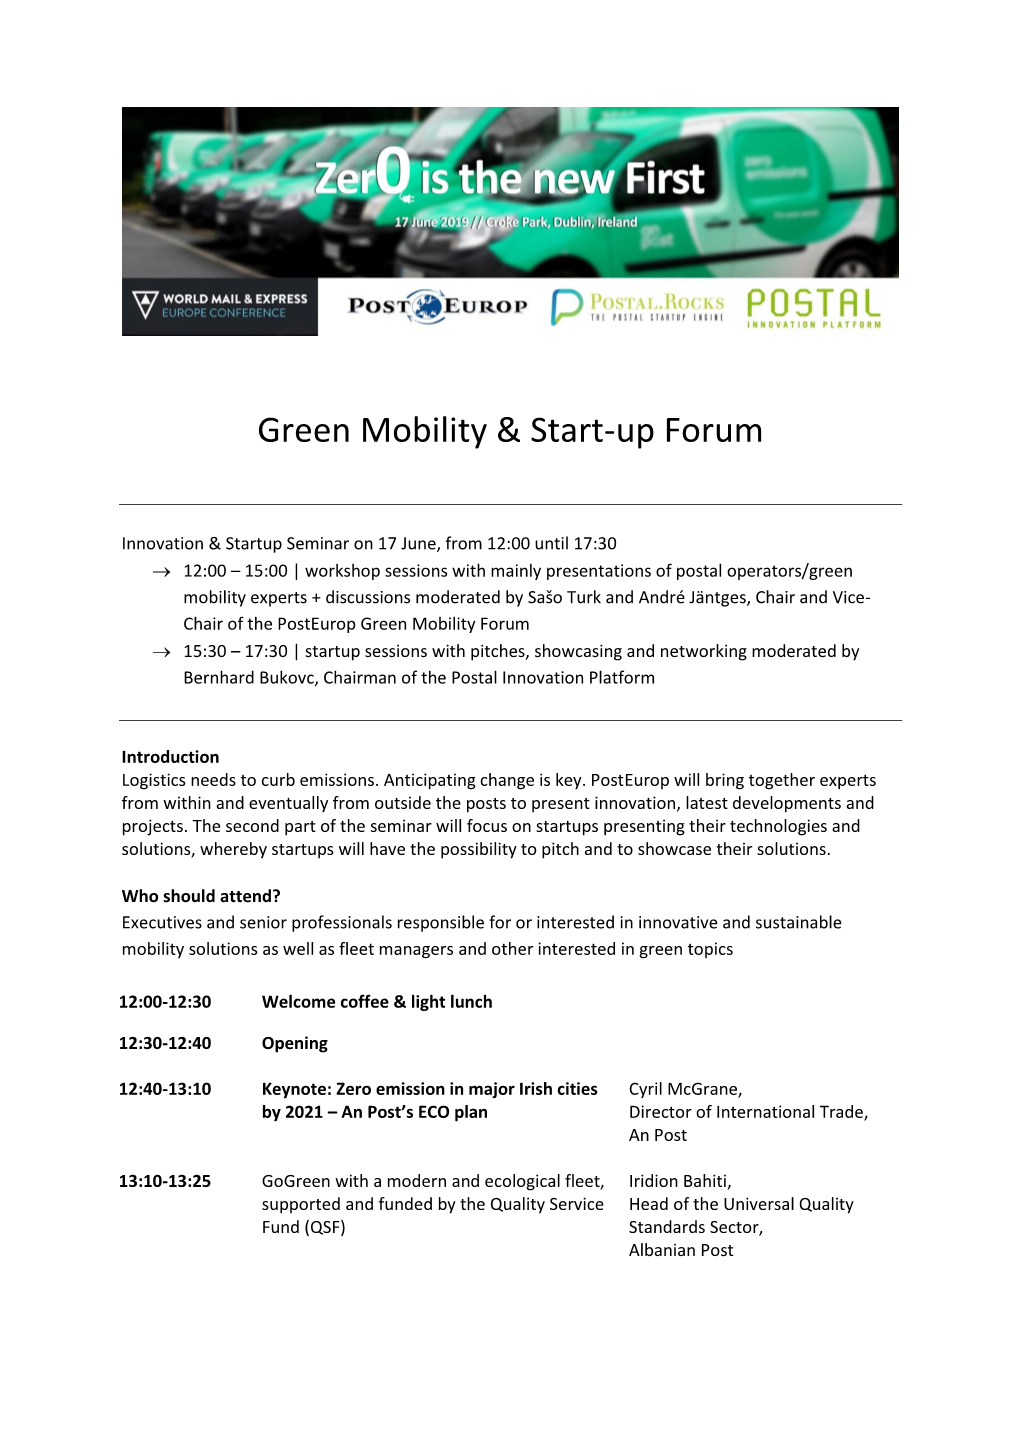 Green Mobility & Start-Up Forum